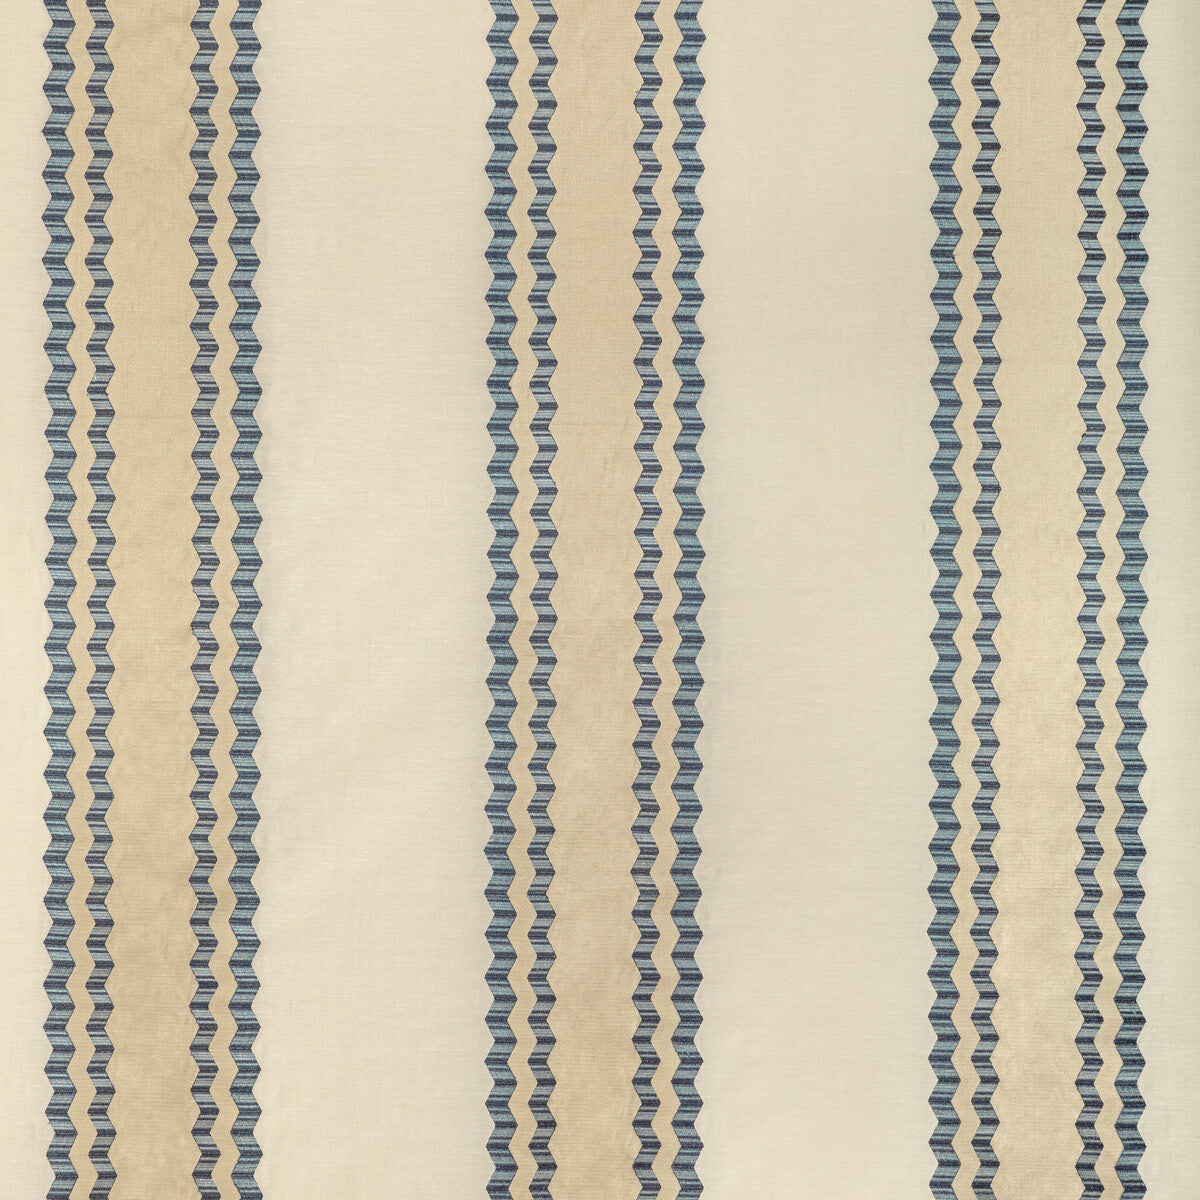 Waldon Stripe fabric in blue color - pattern 2022113.1615.0 - by Lee Jofa in the Bunny Williams Arcadia collection